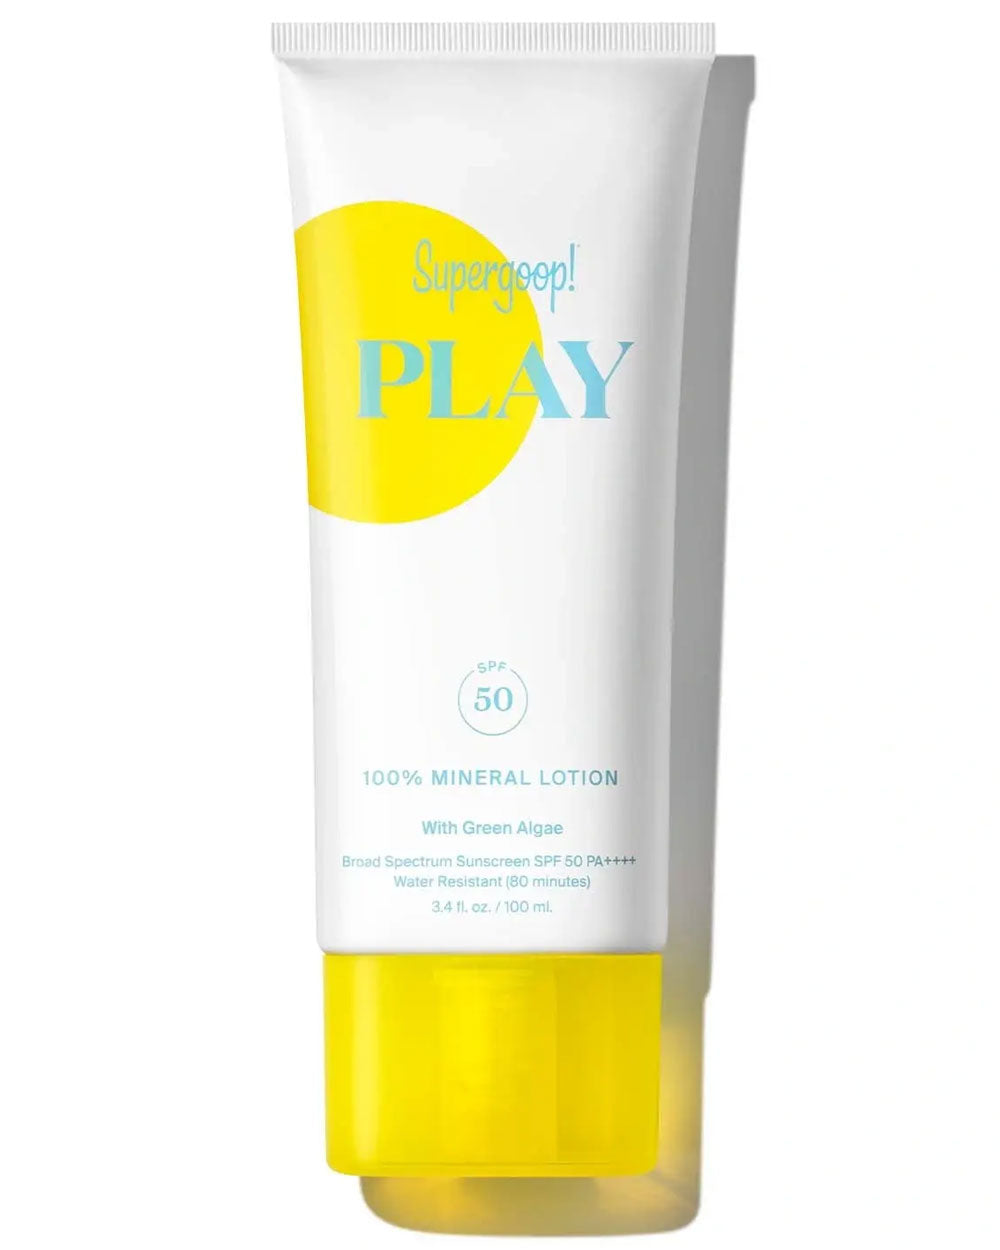 Play 100% Mineral Lotion SPF 50 with Green Algae